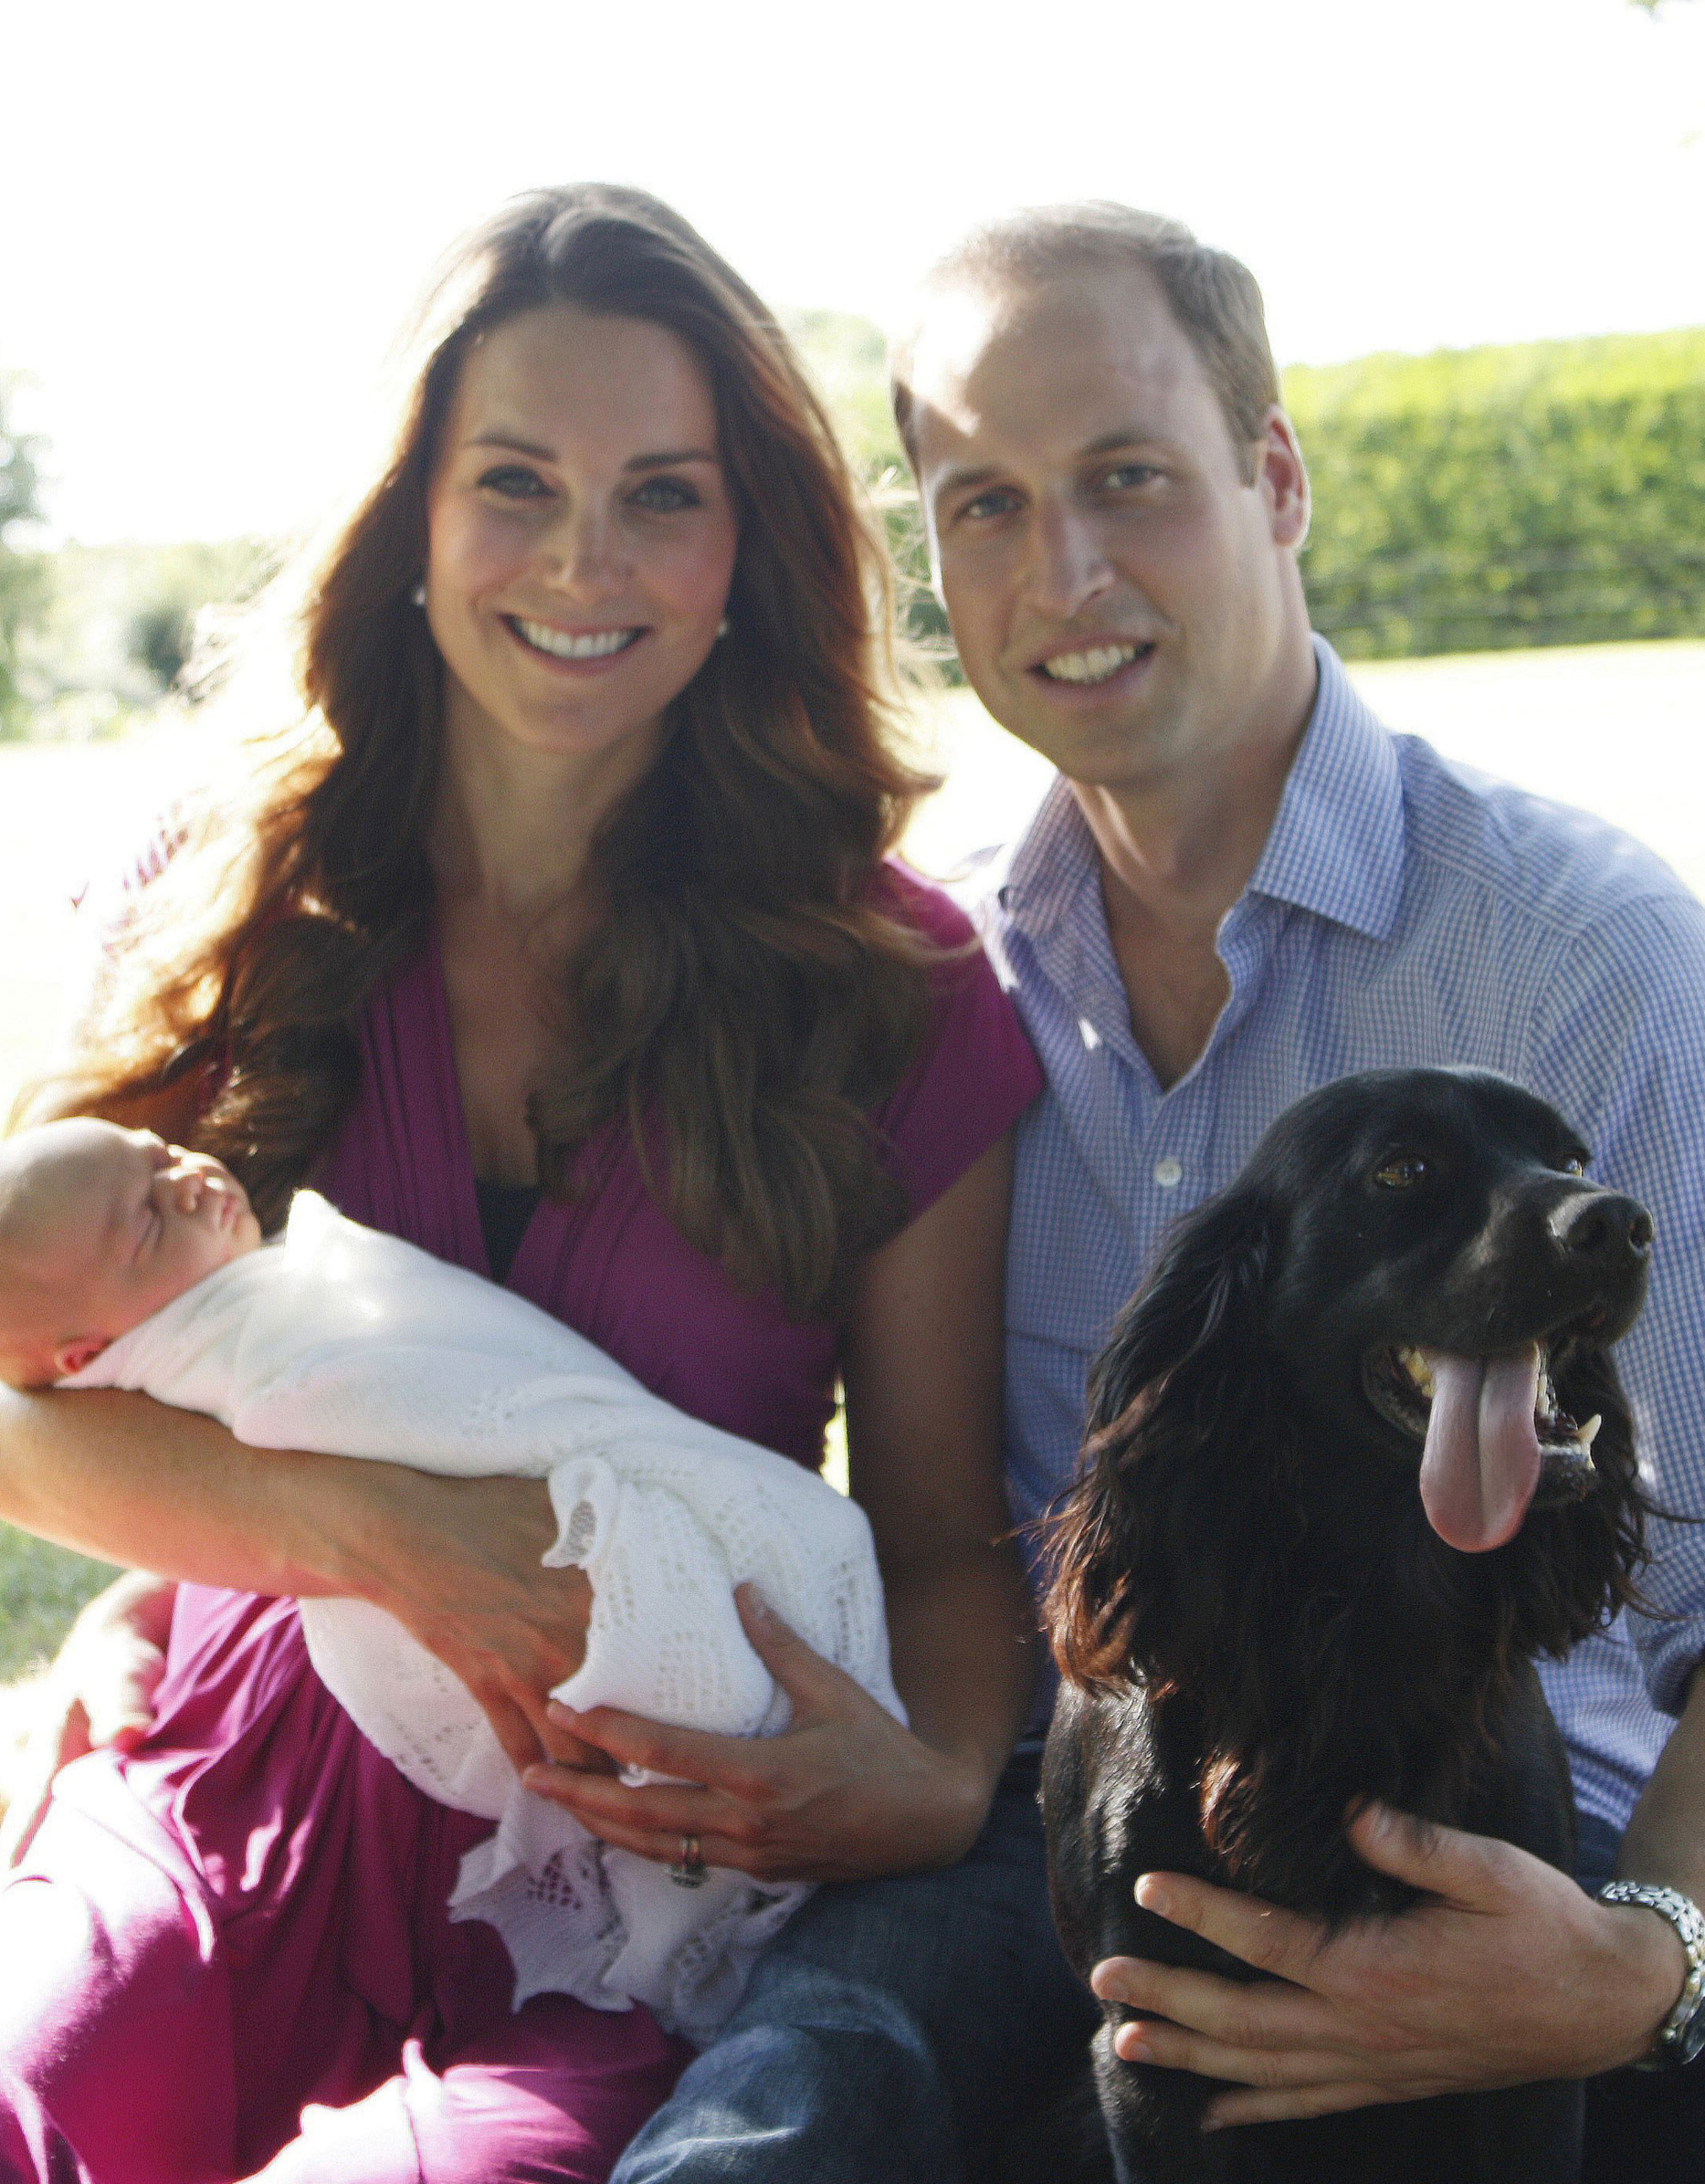 The Duke and Duchess of Cambridge with baby Prince George and Lupo